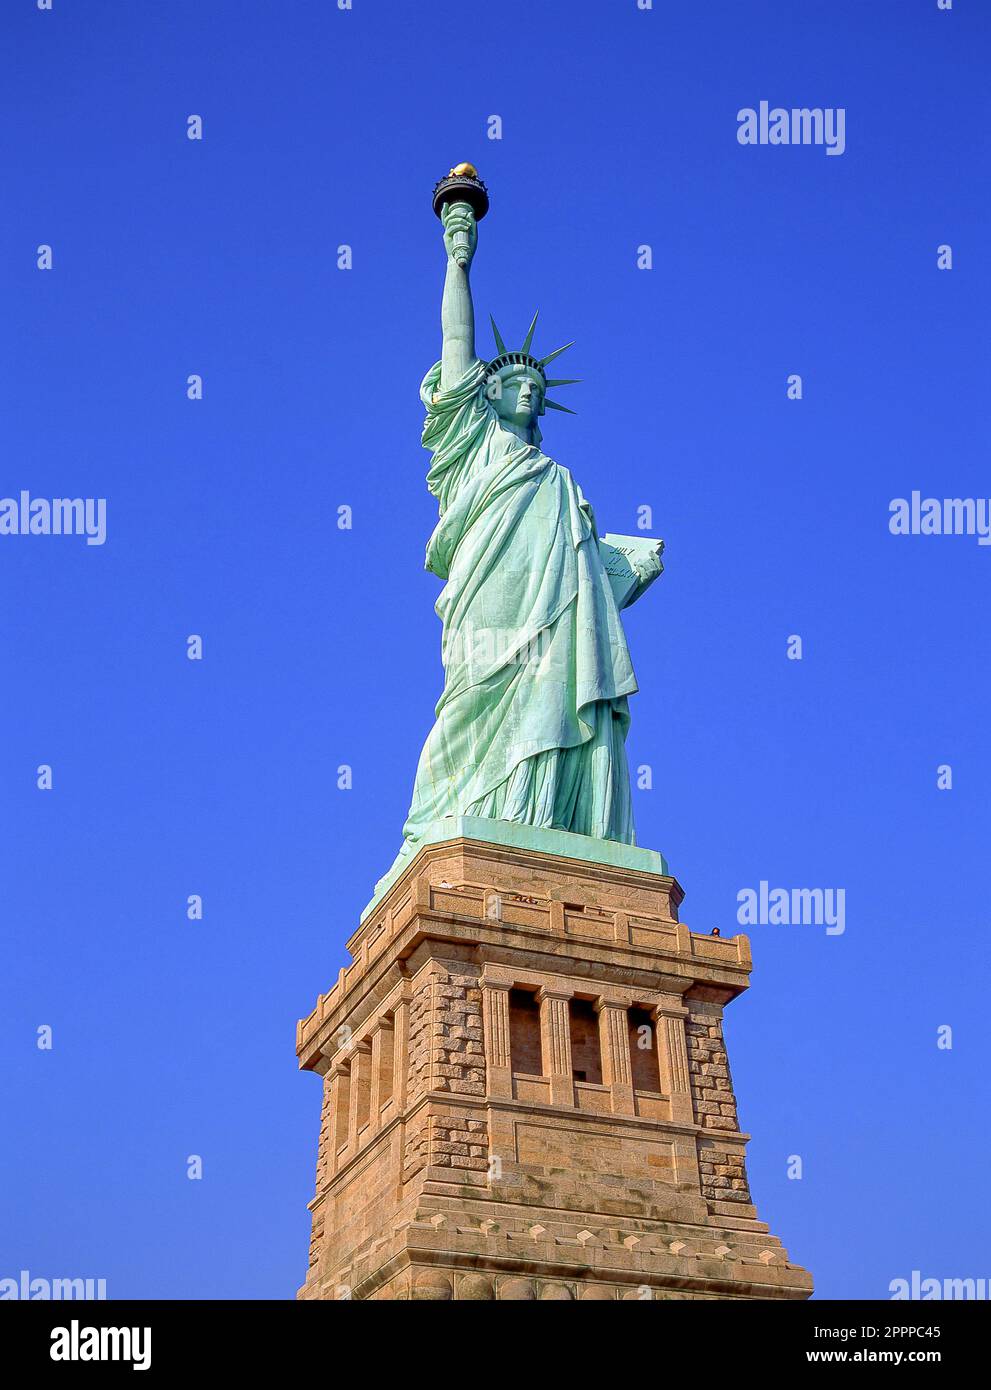 Statue of Liberty National Monument, Liberty Island, New York, New York State, United States of America Stock Photo